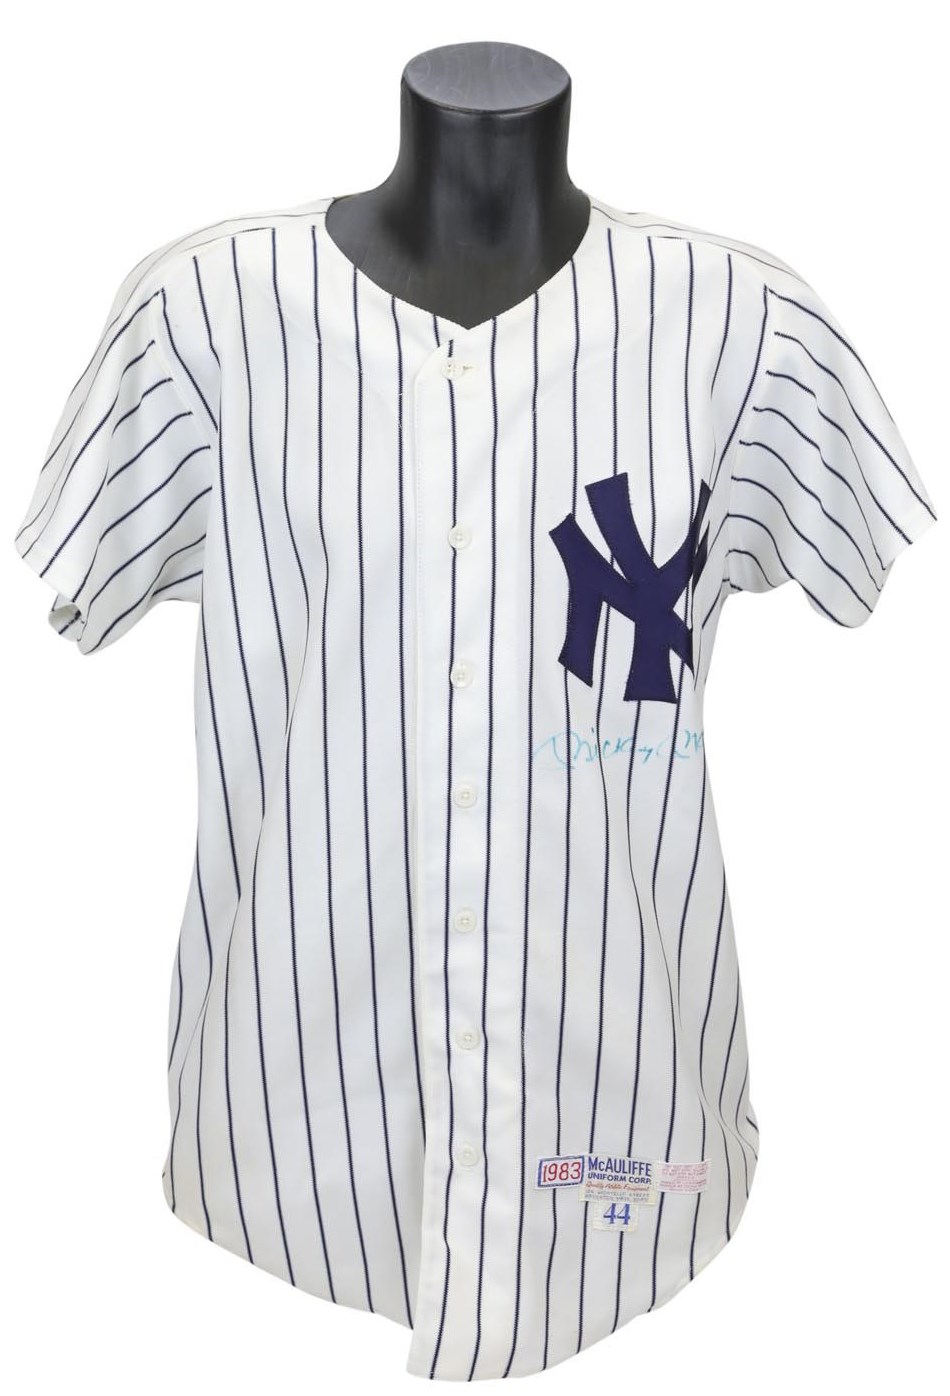 1983 Mickey Mantle Signed Yankees Jersey (PSA)